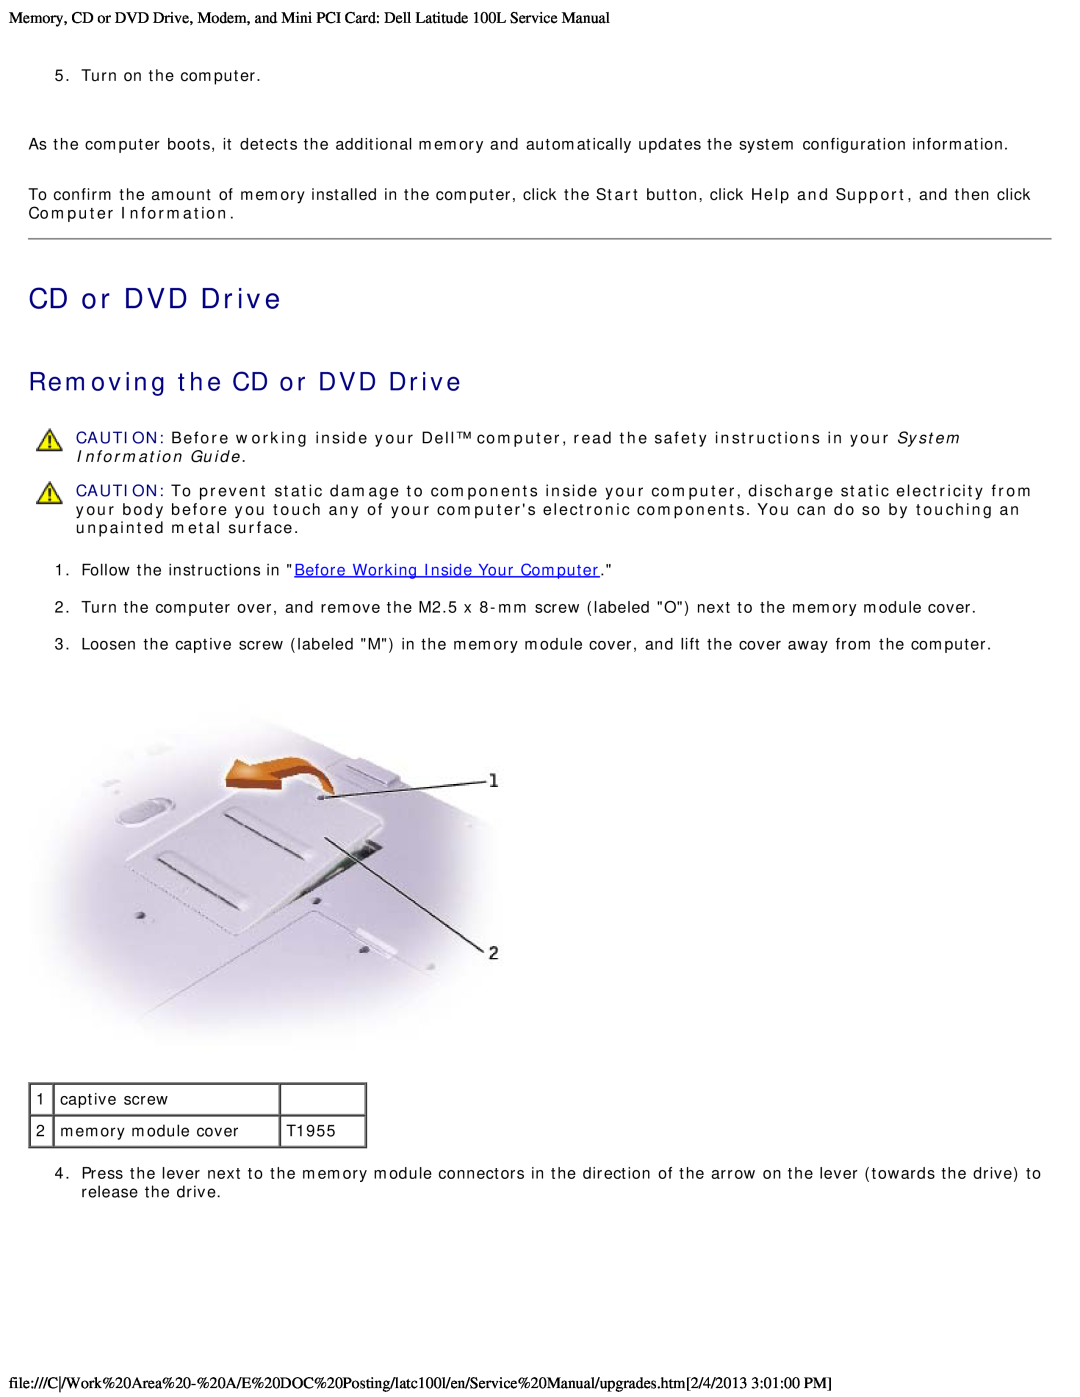 Dell 100L service manual Removing the CD or DVD Drive, Follow the instructions in Before Working Inside Your Computer 